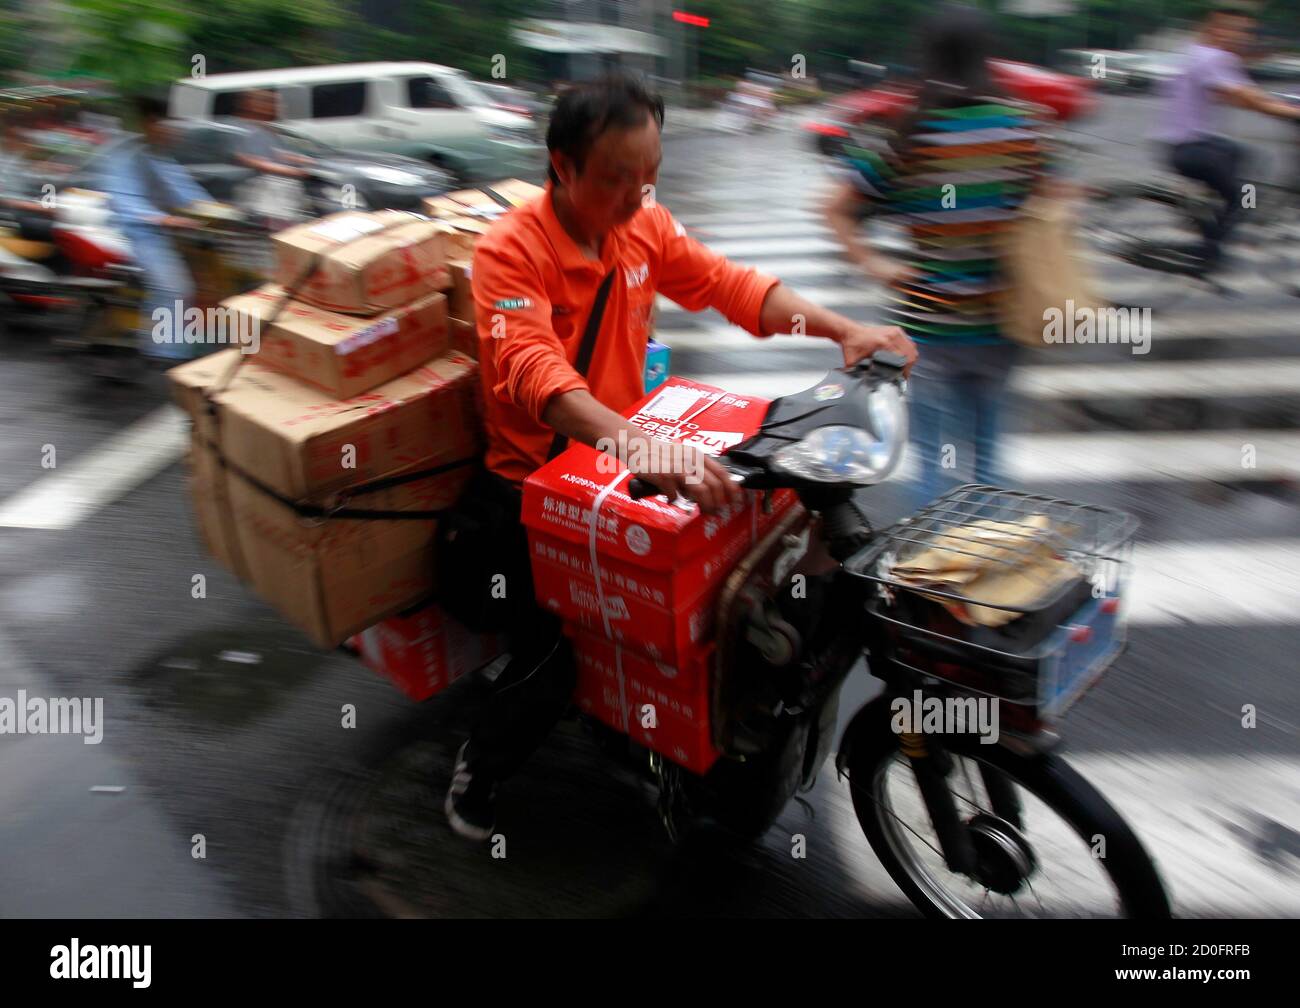 A man rides a motorcycle as he delivers a box in Shanghai July 11, 2012.  China's 35,000 express delivery companies can ship packages hundreds of  miles for less than the cost of